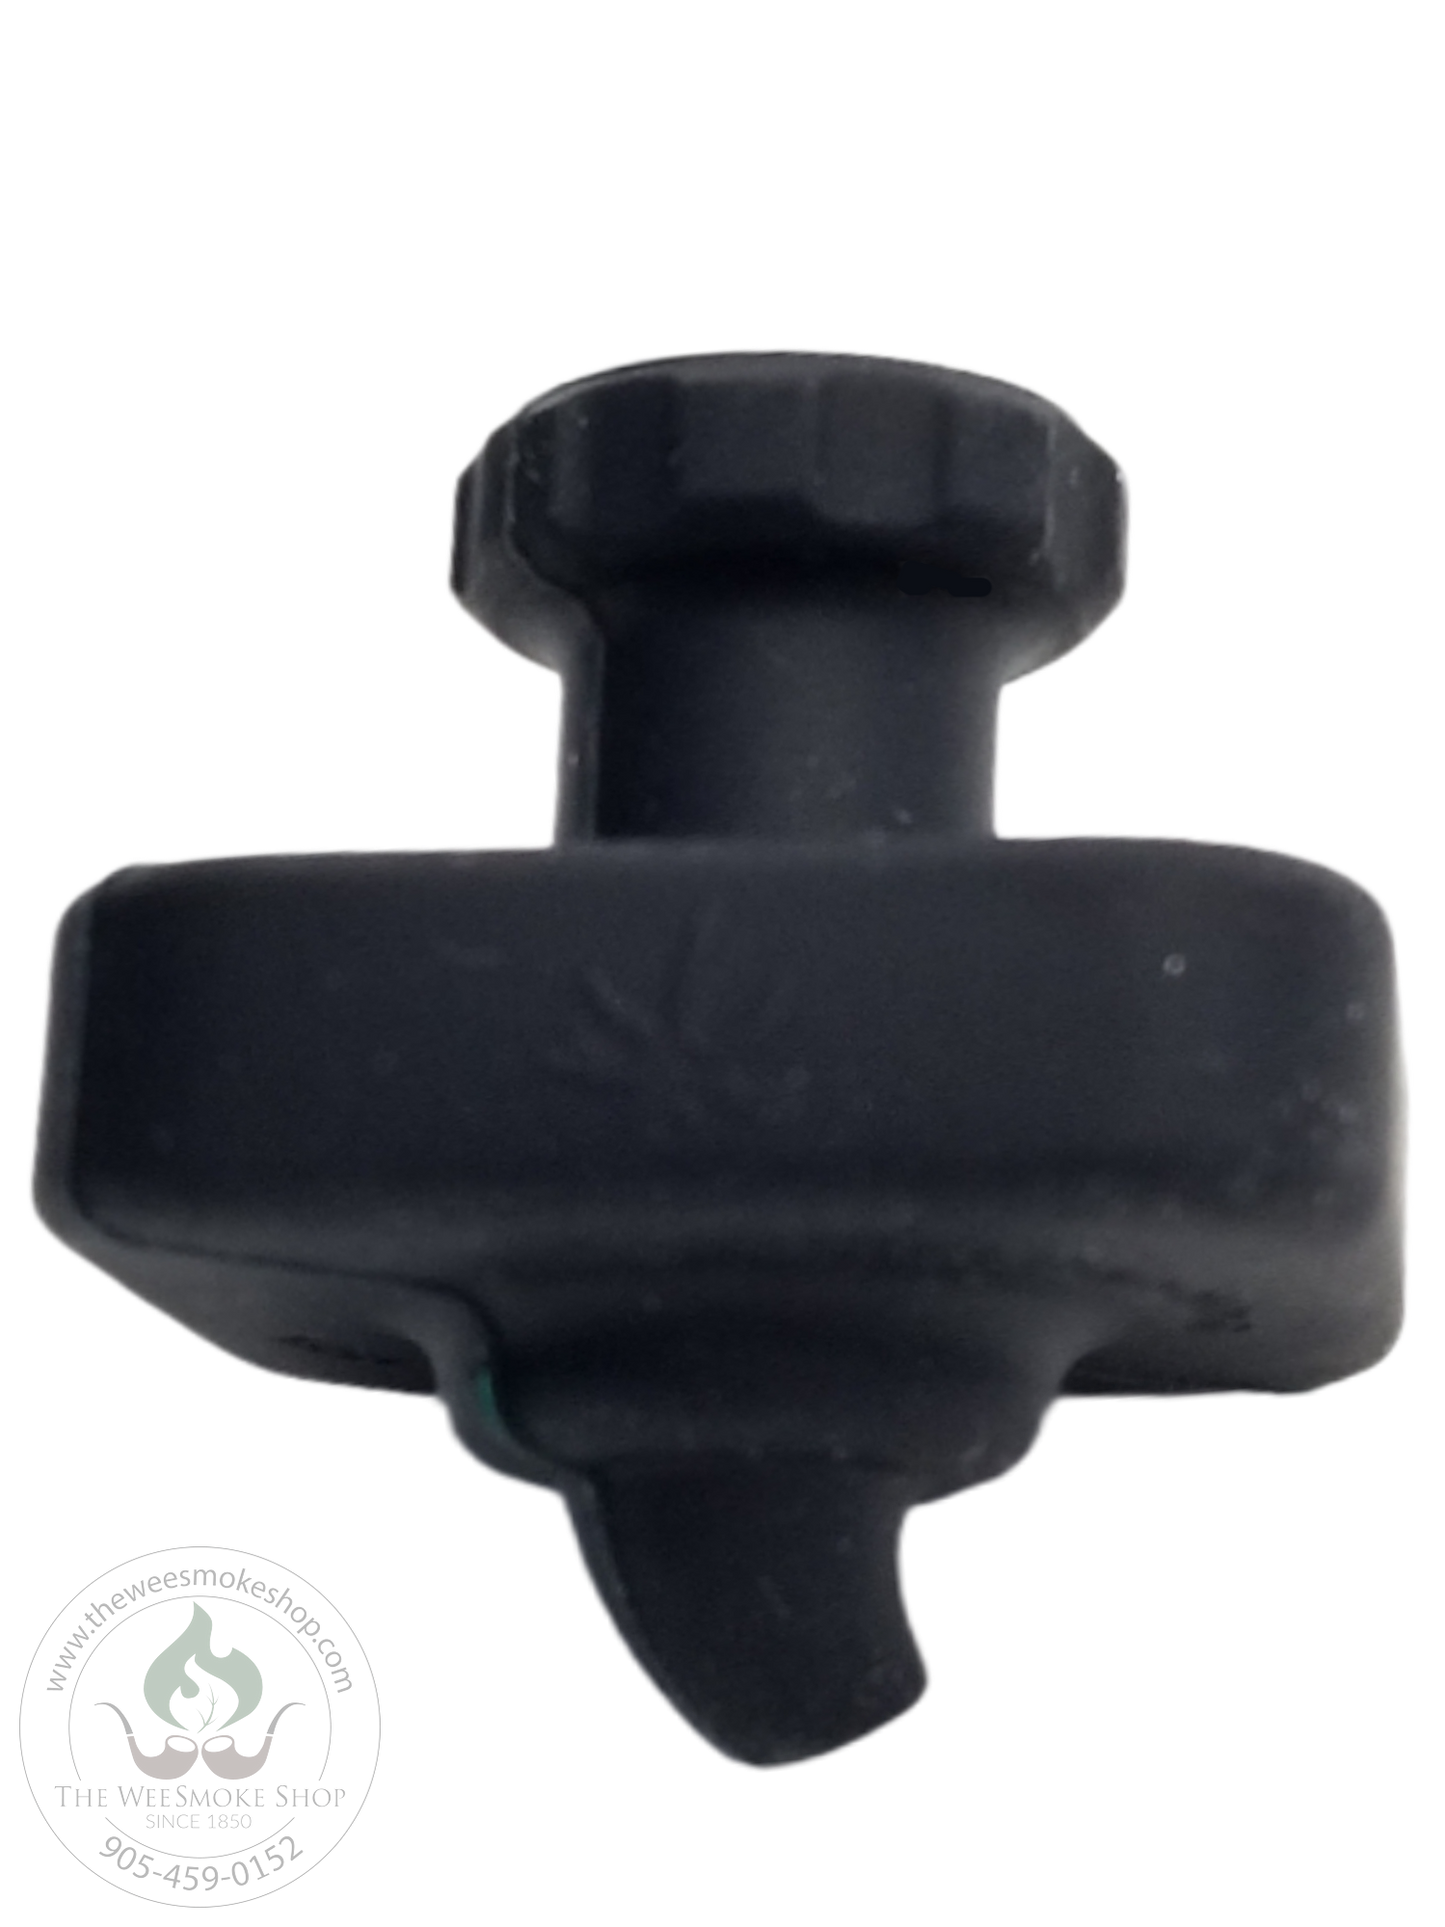 Black-Directional Silicone Carb Cap-Dab Accessories-The Wee Smoke Shop